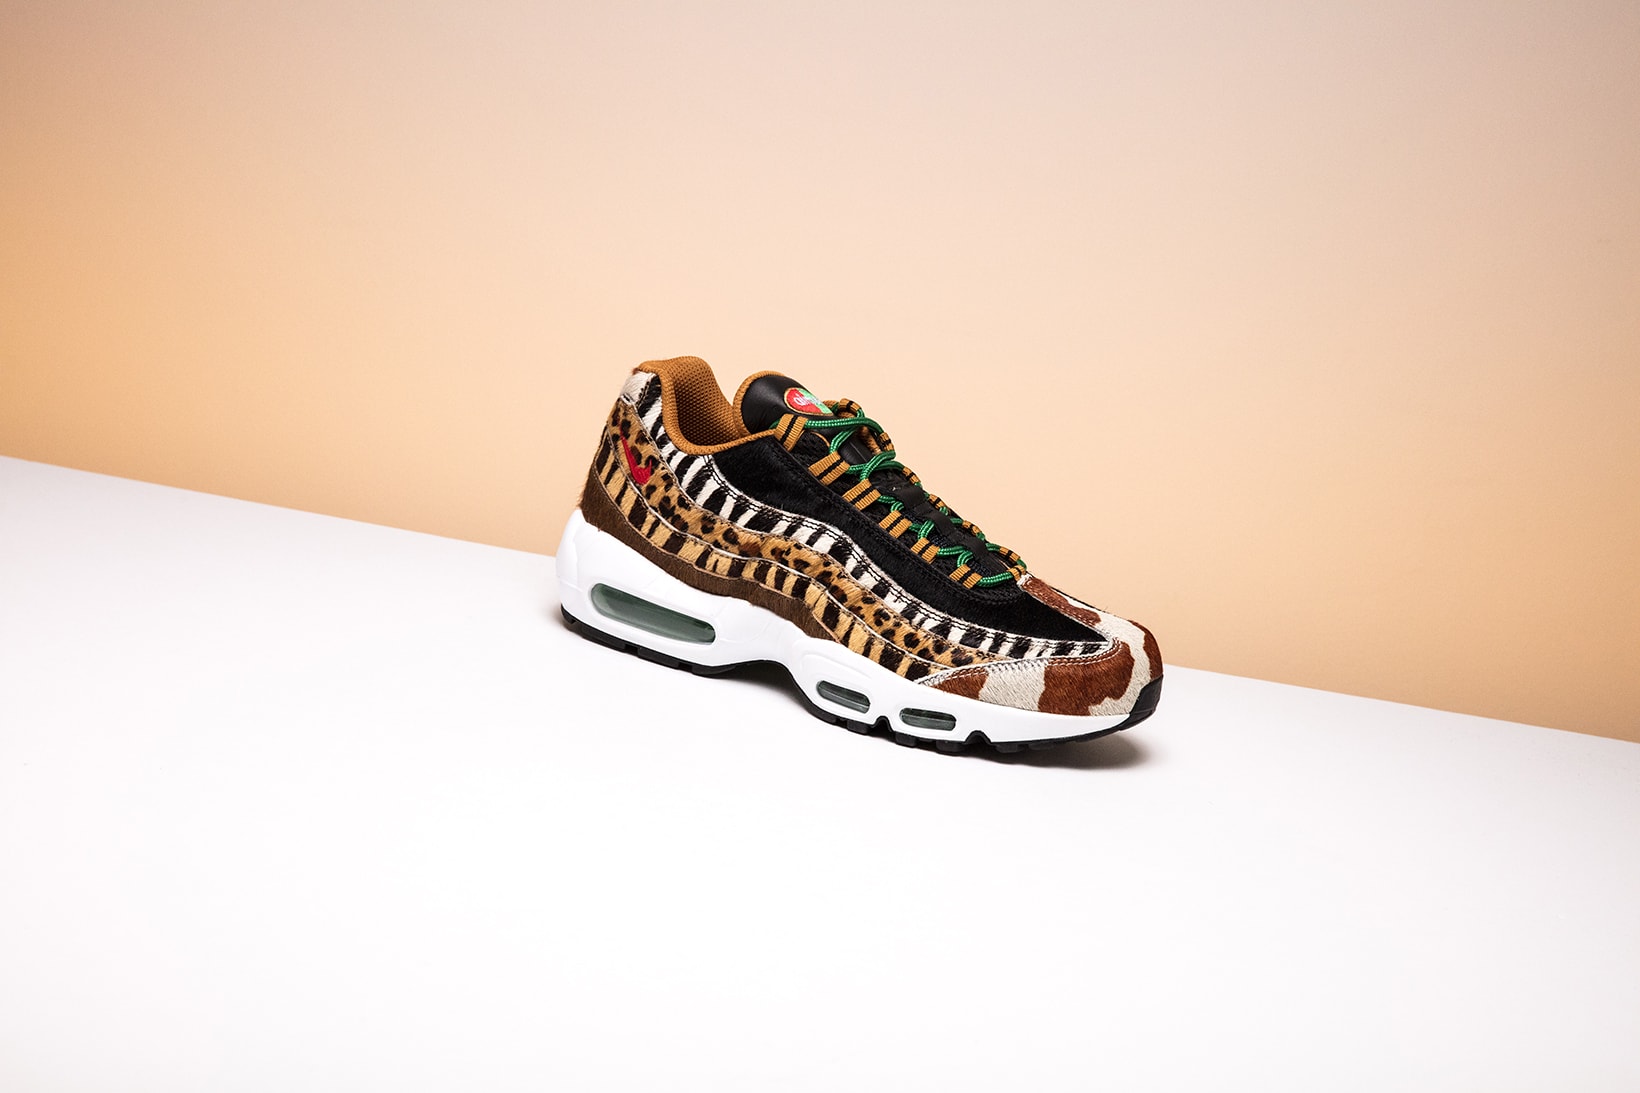 atmos Nike Animal Pack 2 0 closer look Official Release Date info drop march 17 2018 sneakers shoes footwear